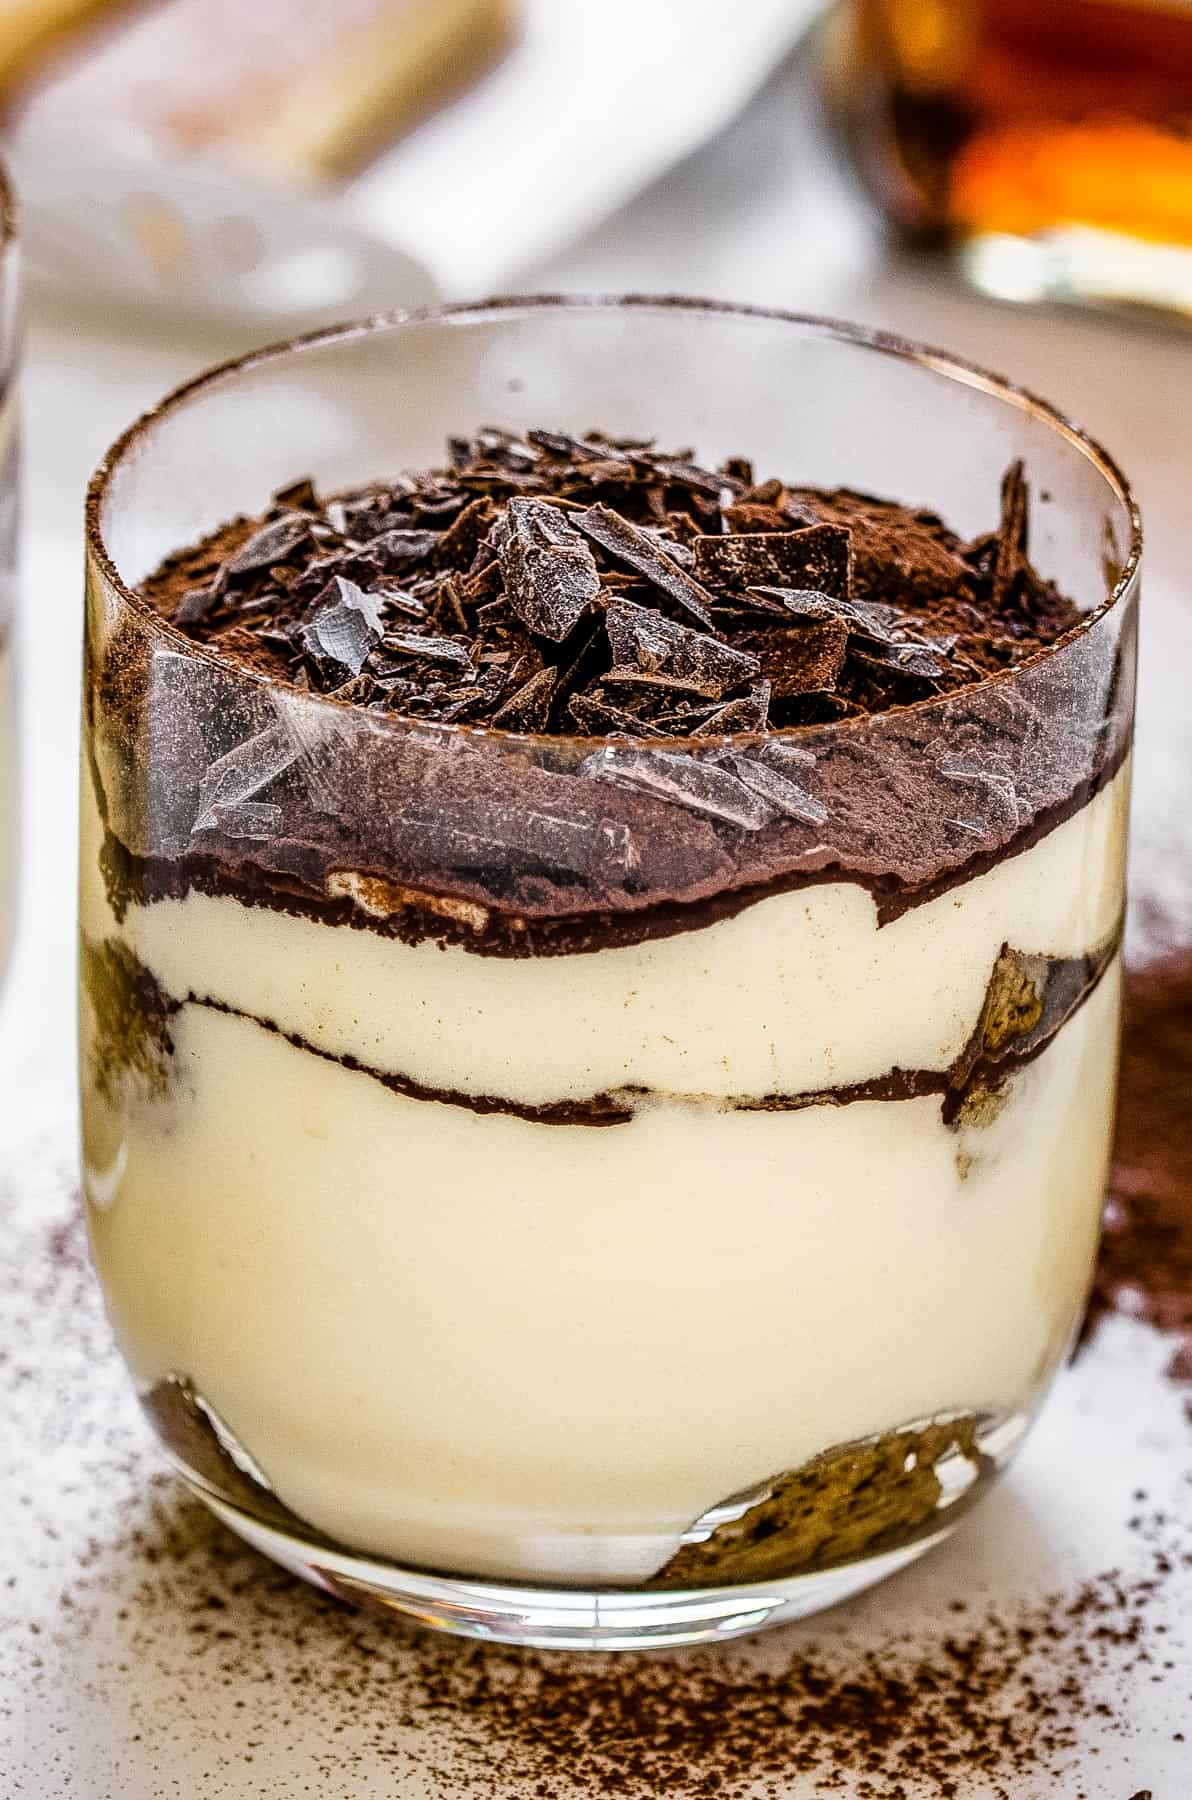 Cocoa powder is dusted over a glass of tiramisu.